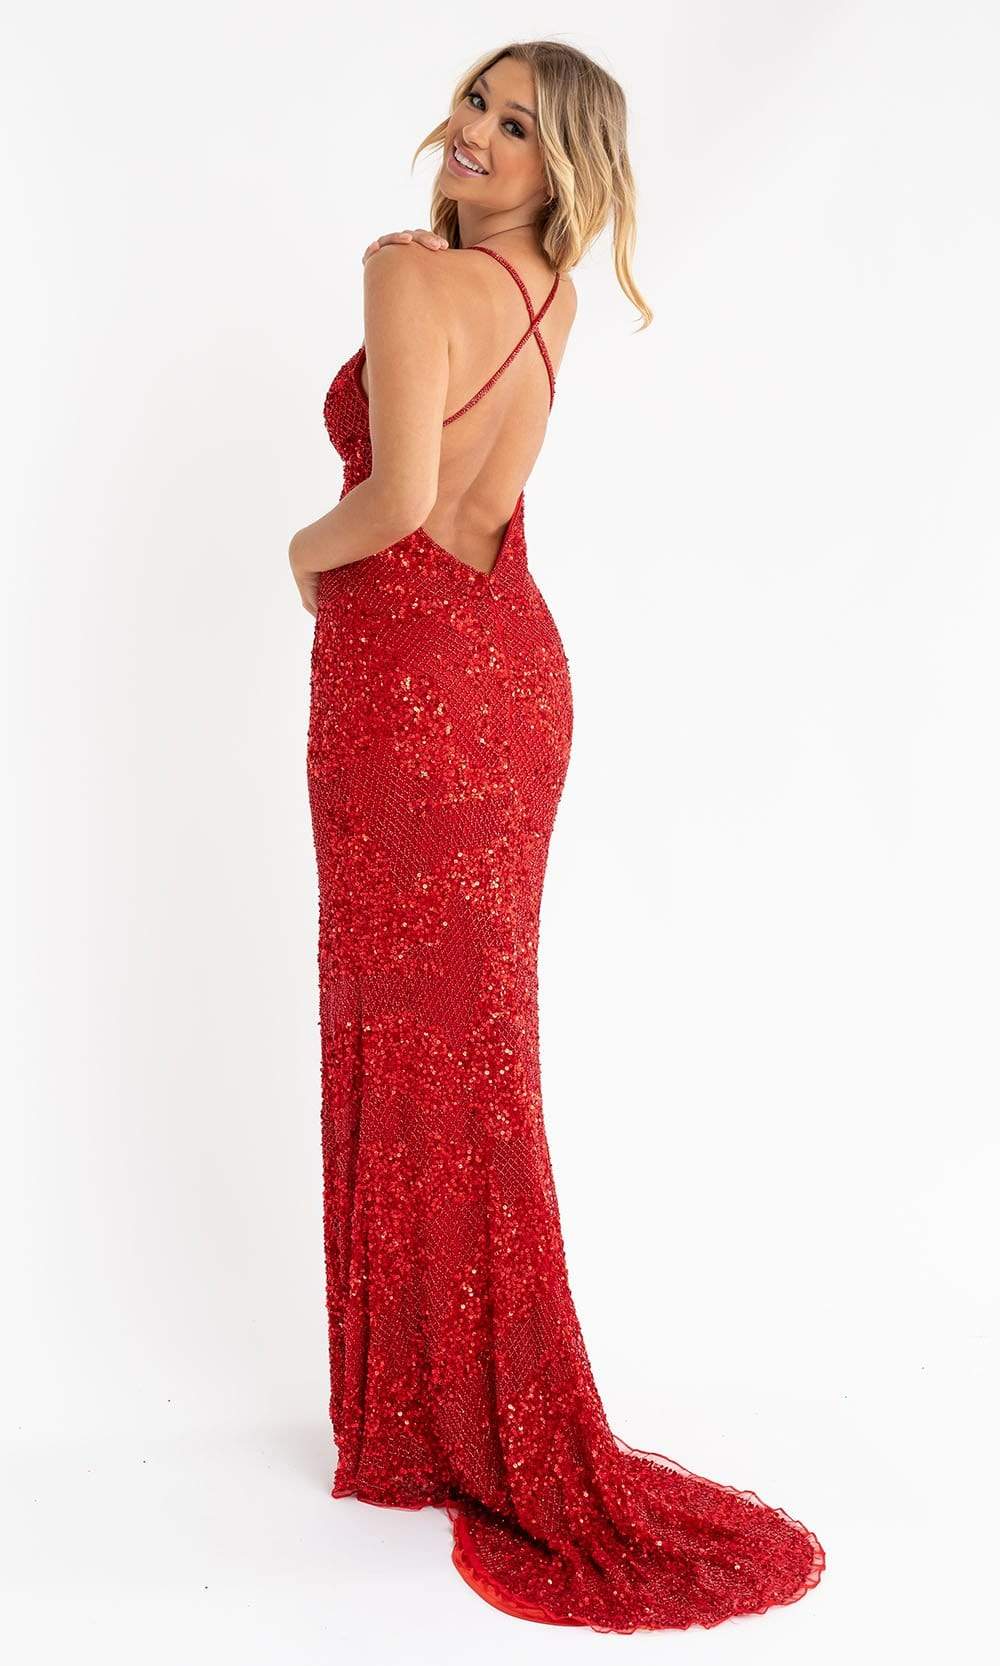 Primavera Couture - 3760 Sequin V-Neck Criss Cross Back Gown Special Occasion Dress